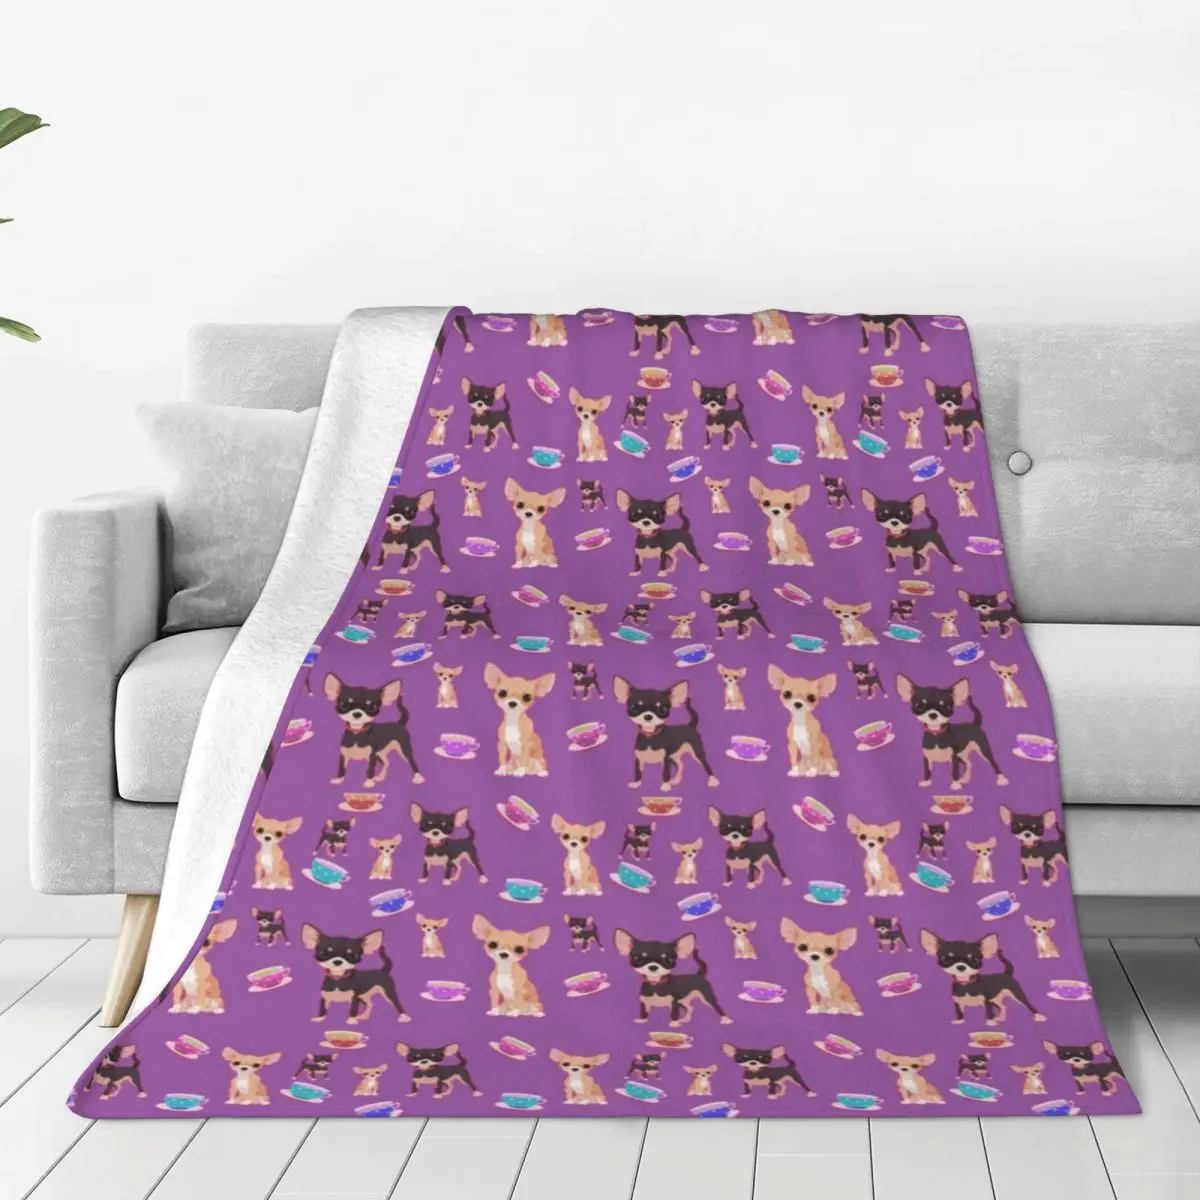 

Cute Teacup Chihuahuas Soft Fleece Throw Blanket Warm and Cozy Comfy Microfiber Blanket for Couch Sofa Bed 40"x30"